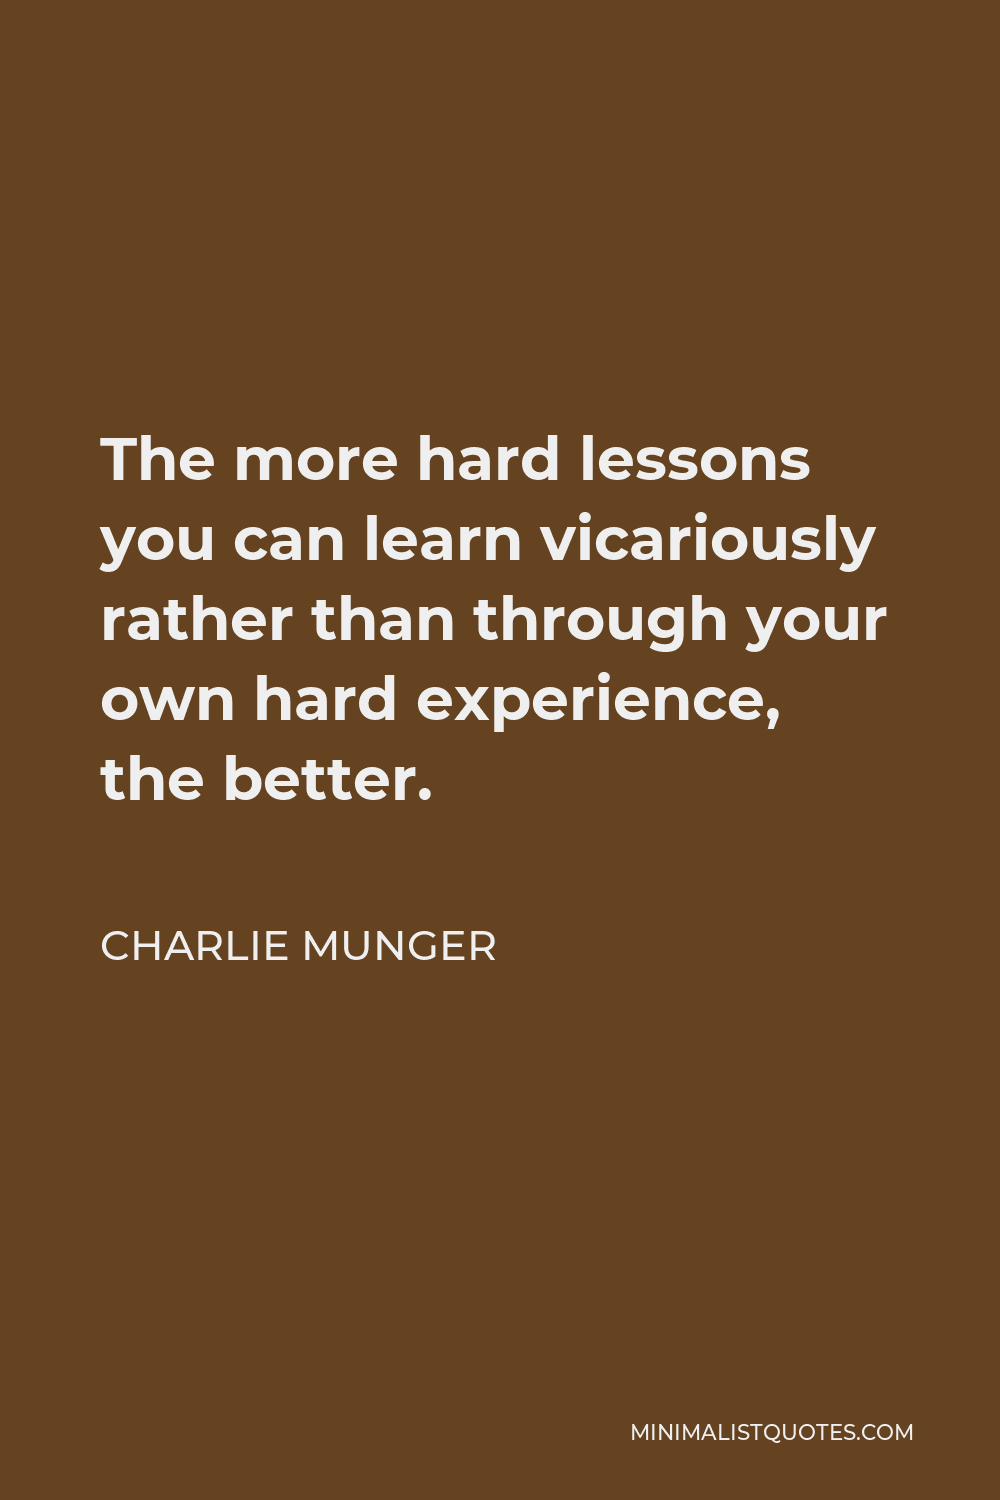 Charlie Munger Quote - The more hard lessons you can learn vicariously rather than through your own hard experience, the better.